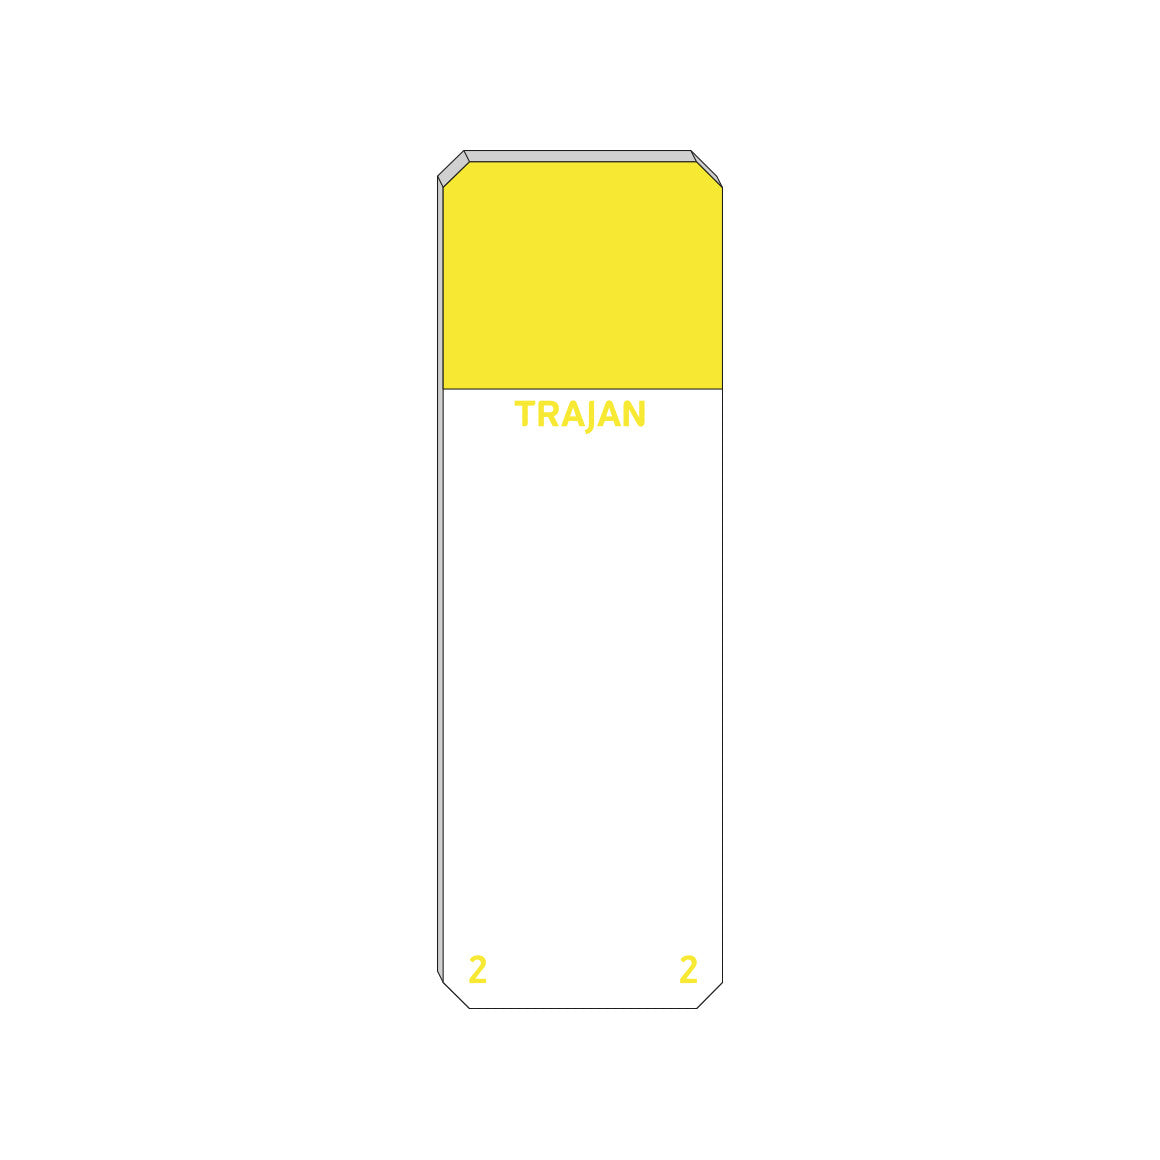 Trajan Scientific and Medical, Series 2 Adhesive Microscope Slides, Yellow, Frost 20 mm, 75 mm x 25 mm